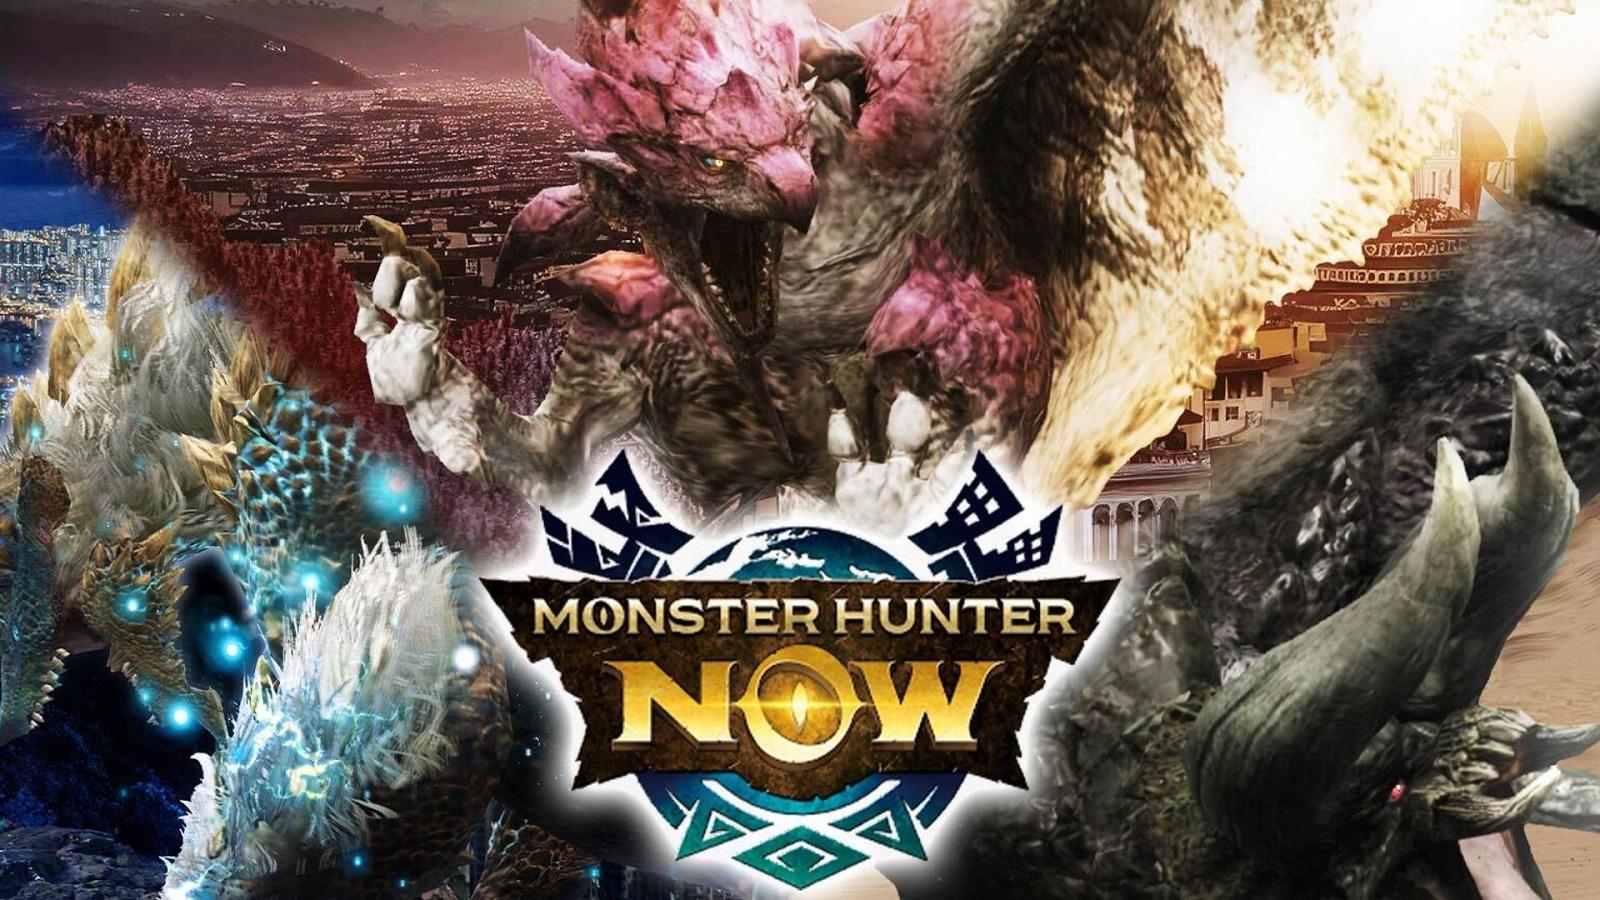 Monster Hunter Now New Year event